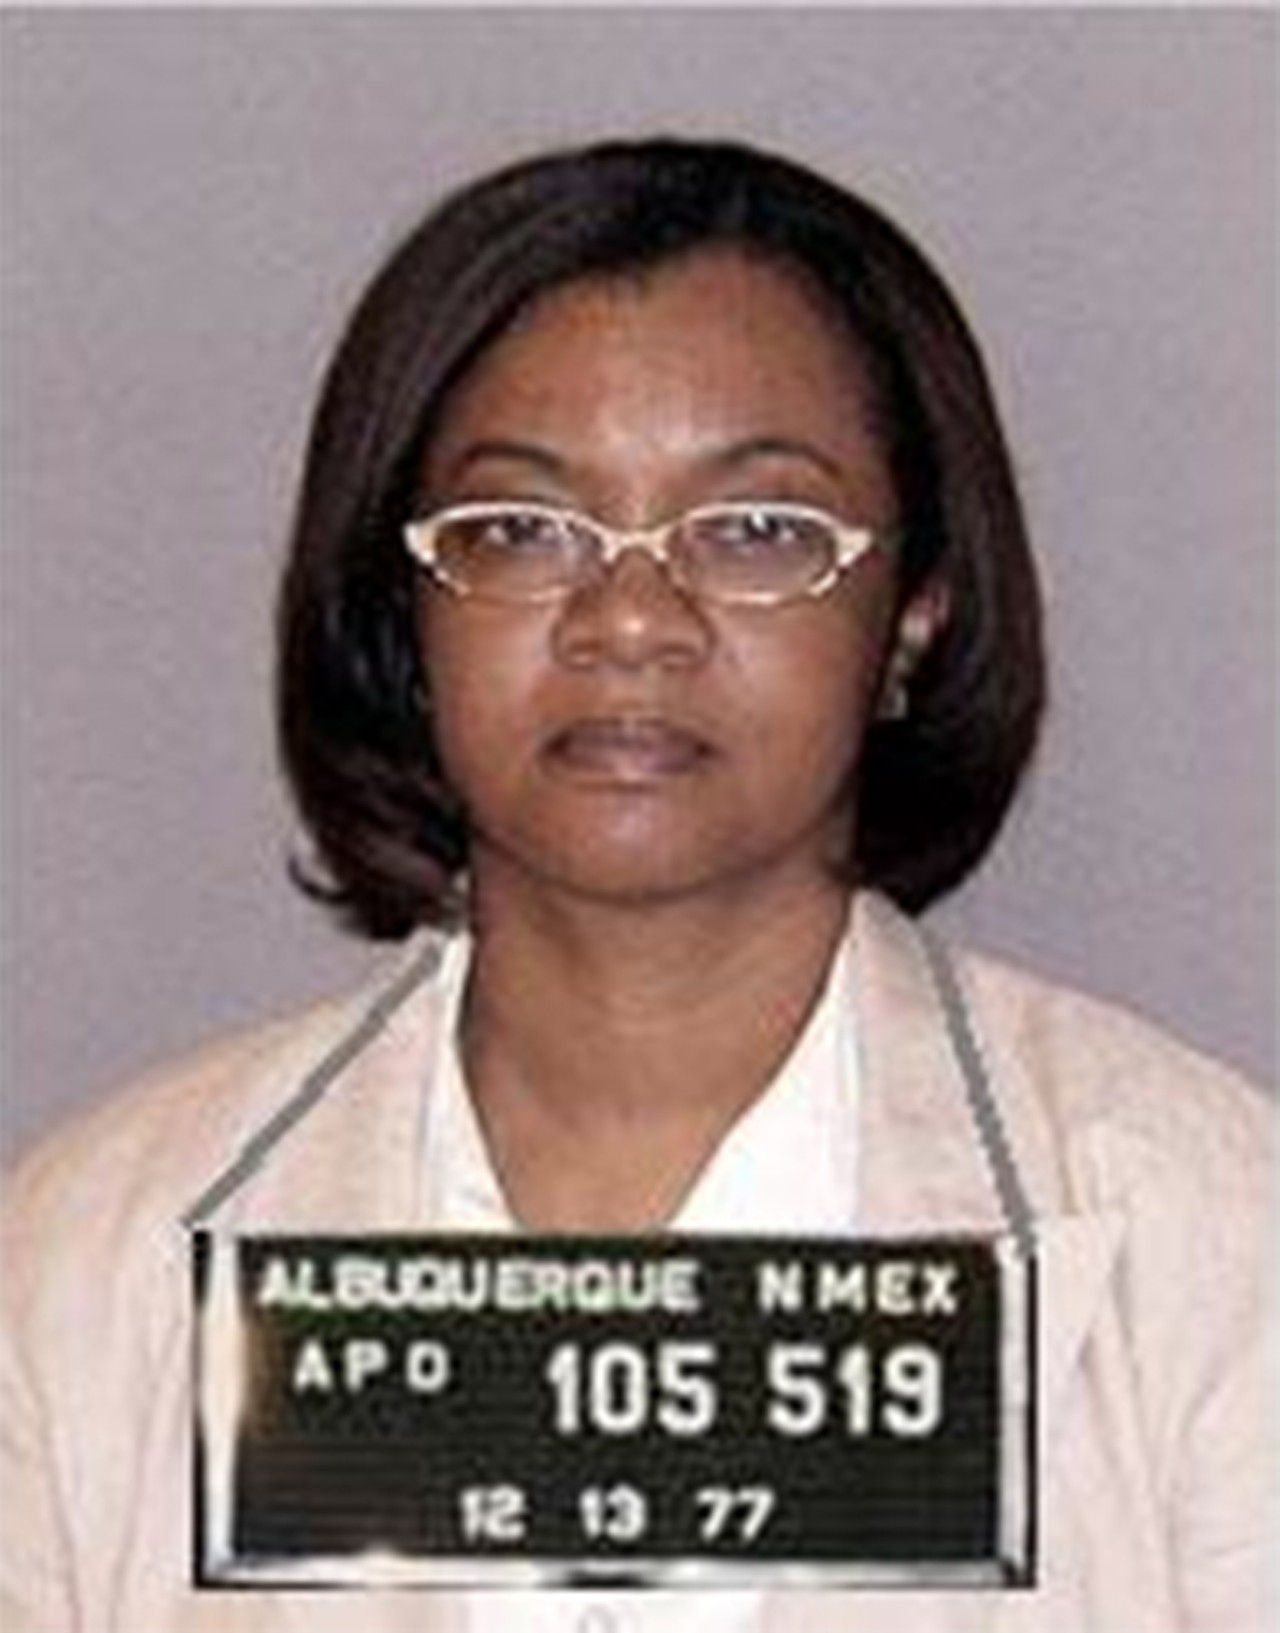   Monica Conyers:     Former Detroit city councilwoman Monica Conyers was sentenced to more than three years in prison after being found guilt of bribery.   Conyers admitted to taking cash in exchange for her political support in Houston-based Synagro’s efforts to secure a $47 million sludge contract with the city.   Oh, she has also been known to cold-cock a bitch or two during drunken bar brawls.